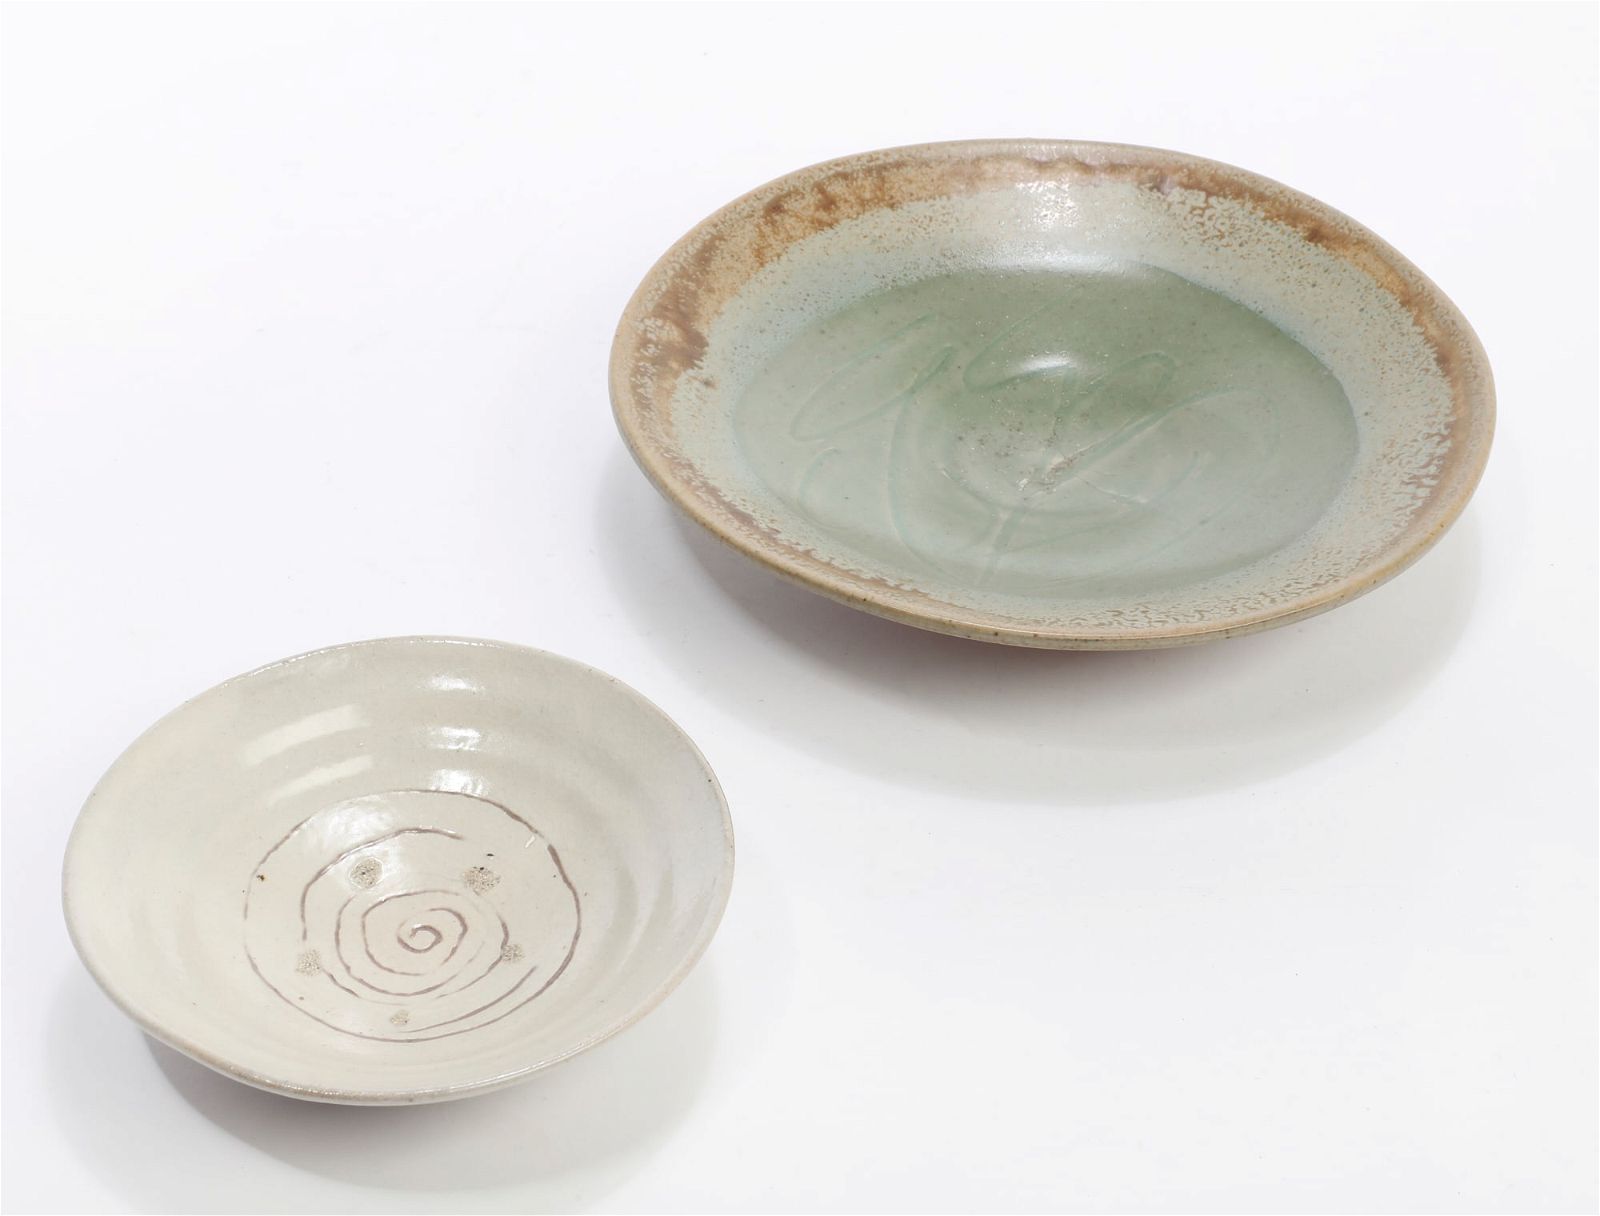 TWO CONTEMPORARY ASIAN CERAMIC DISHESTwo